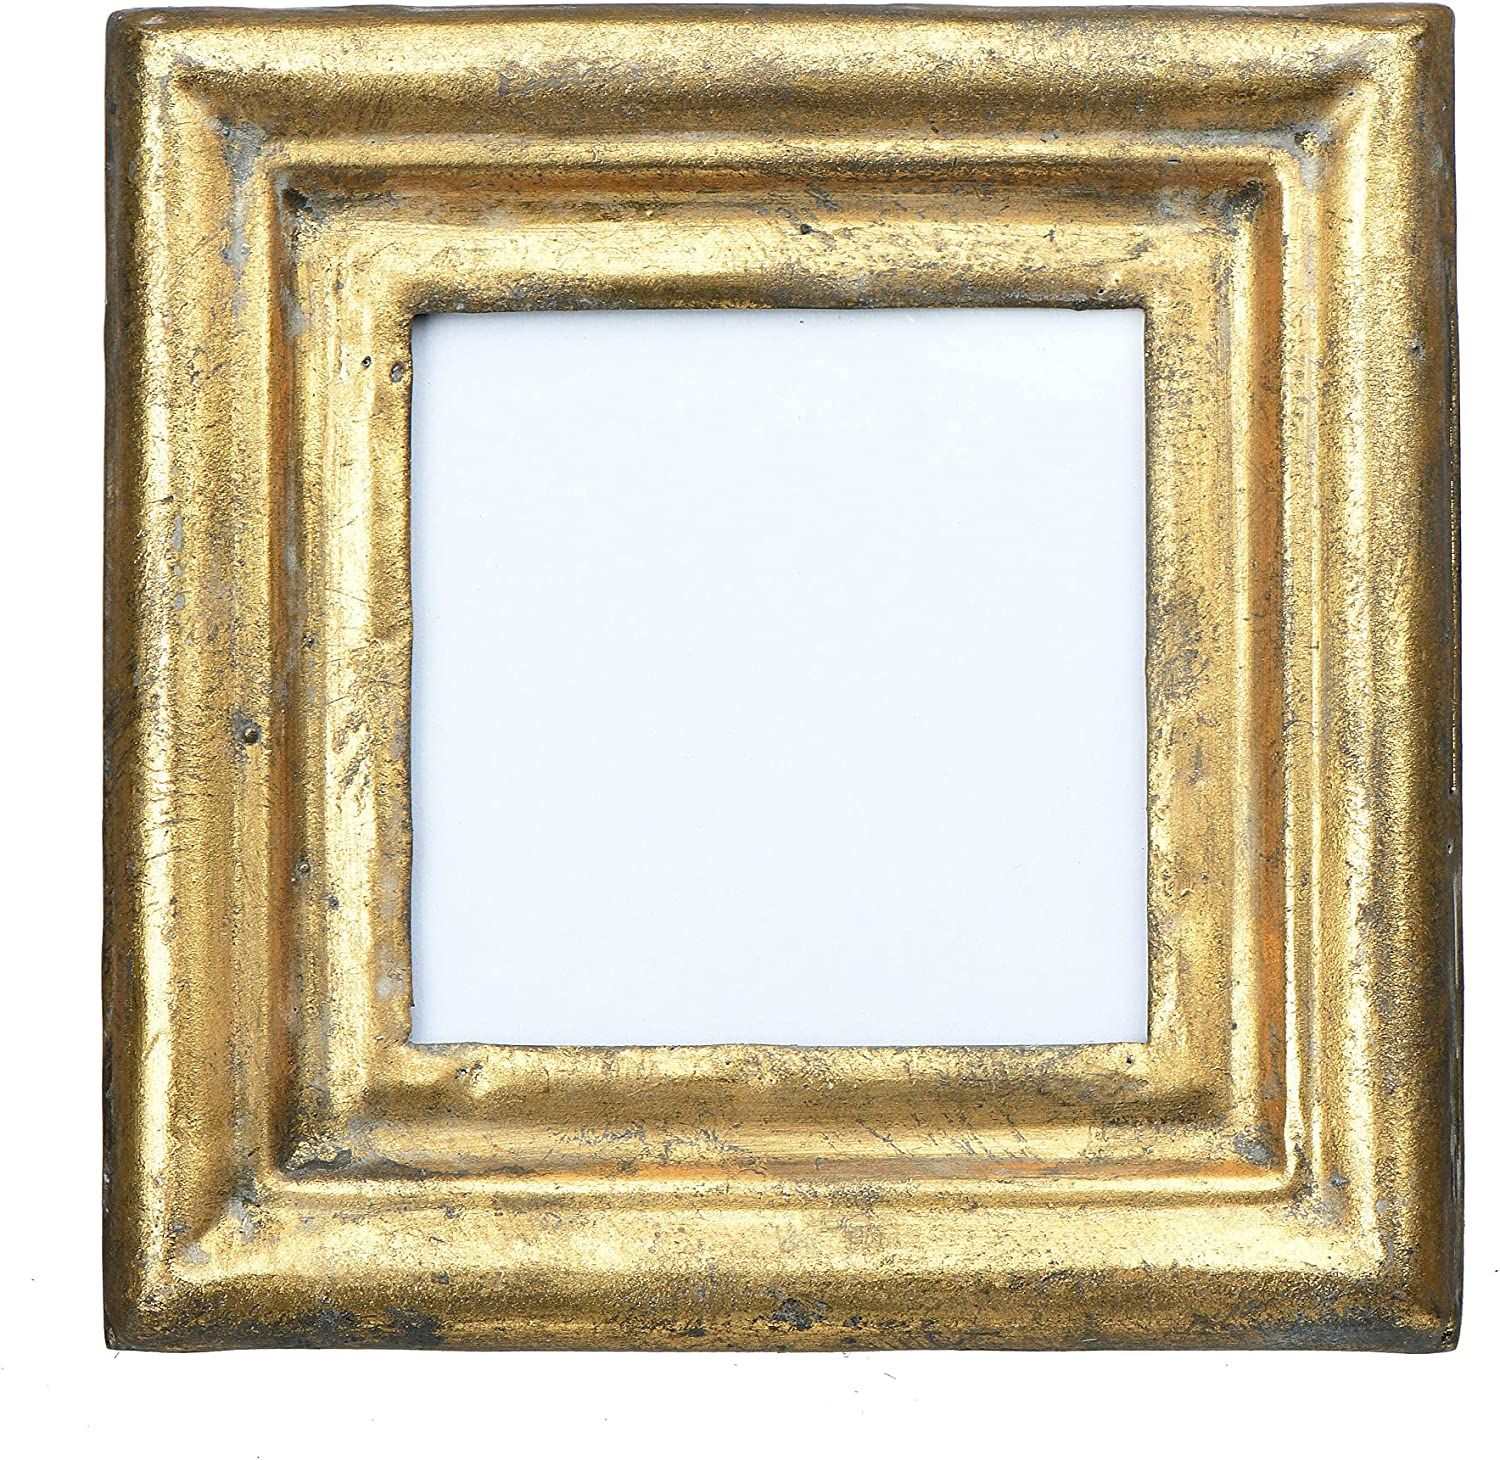 Creative Co-op EC0381 Antiqued Gold Square (Holds 3.5" x 3.5" Photo) Picture Frame | Amazon (US)